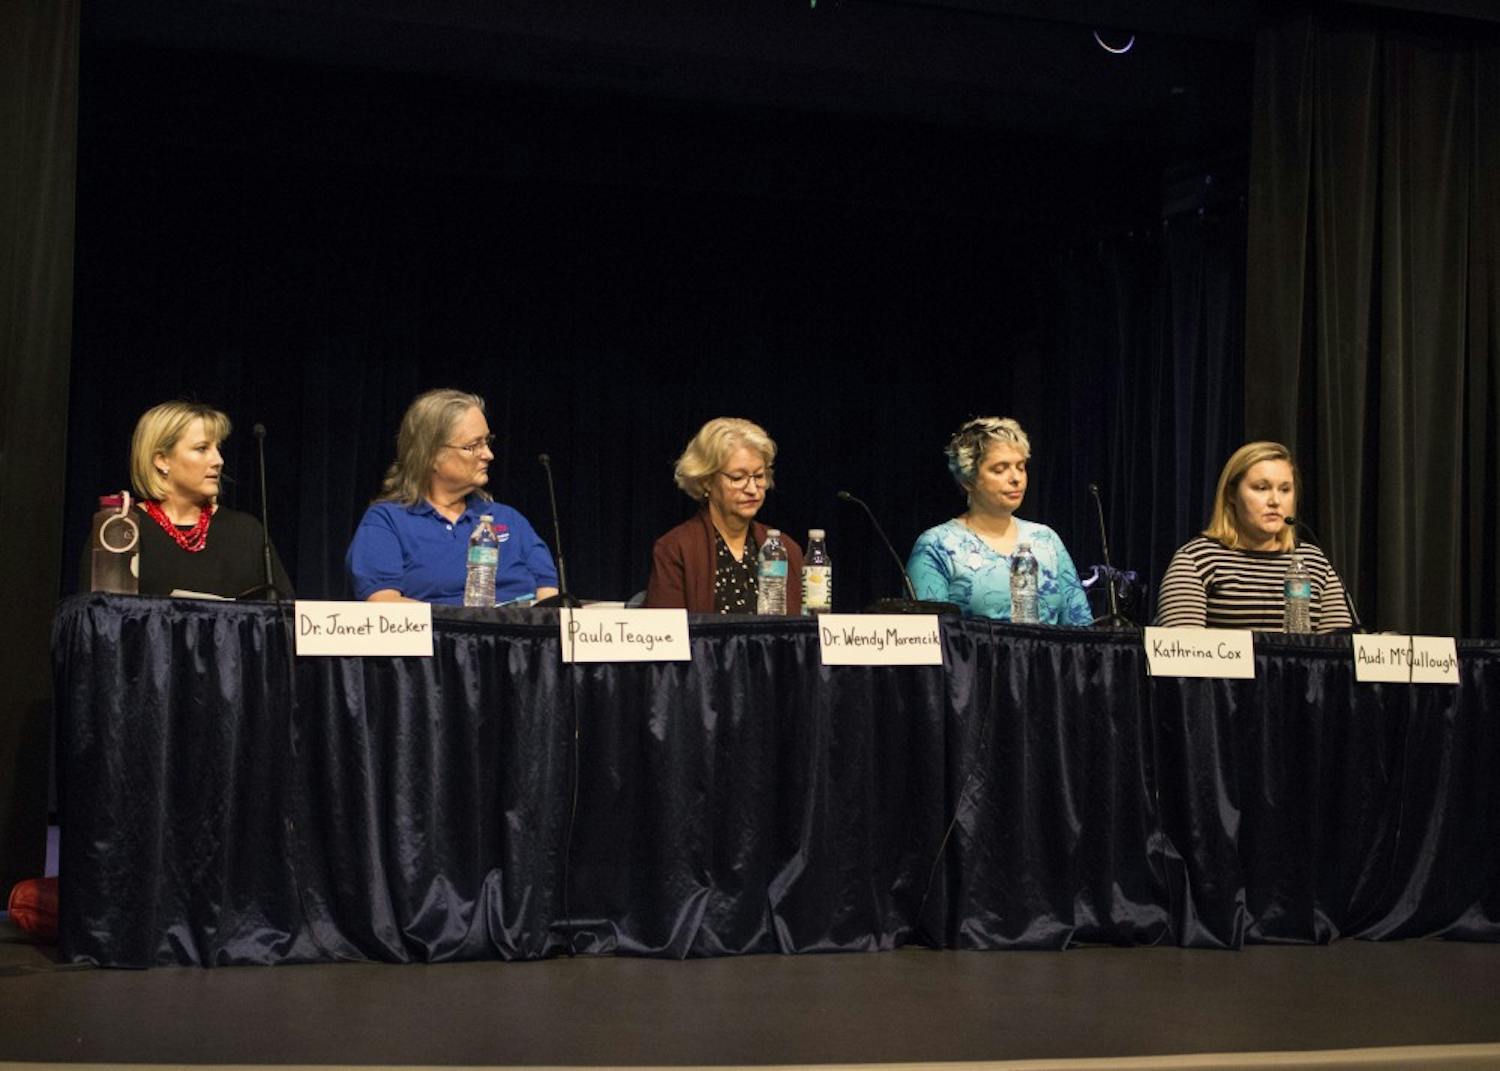 Mother Audi McCullough shares her story about her son, who has a disability, at a panel discussion on Thursday evening at the Monroe County Public Library. Panelists came together to discuss special education in the current public school system.&nbsp;